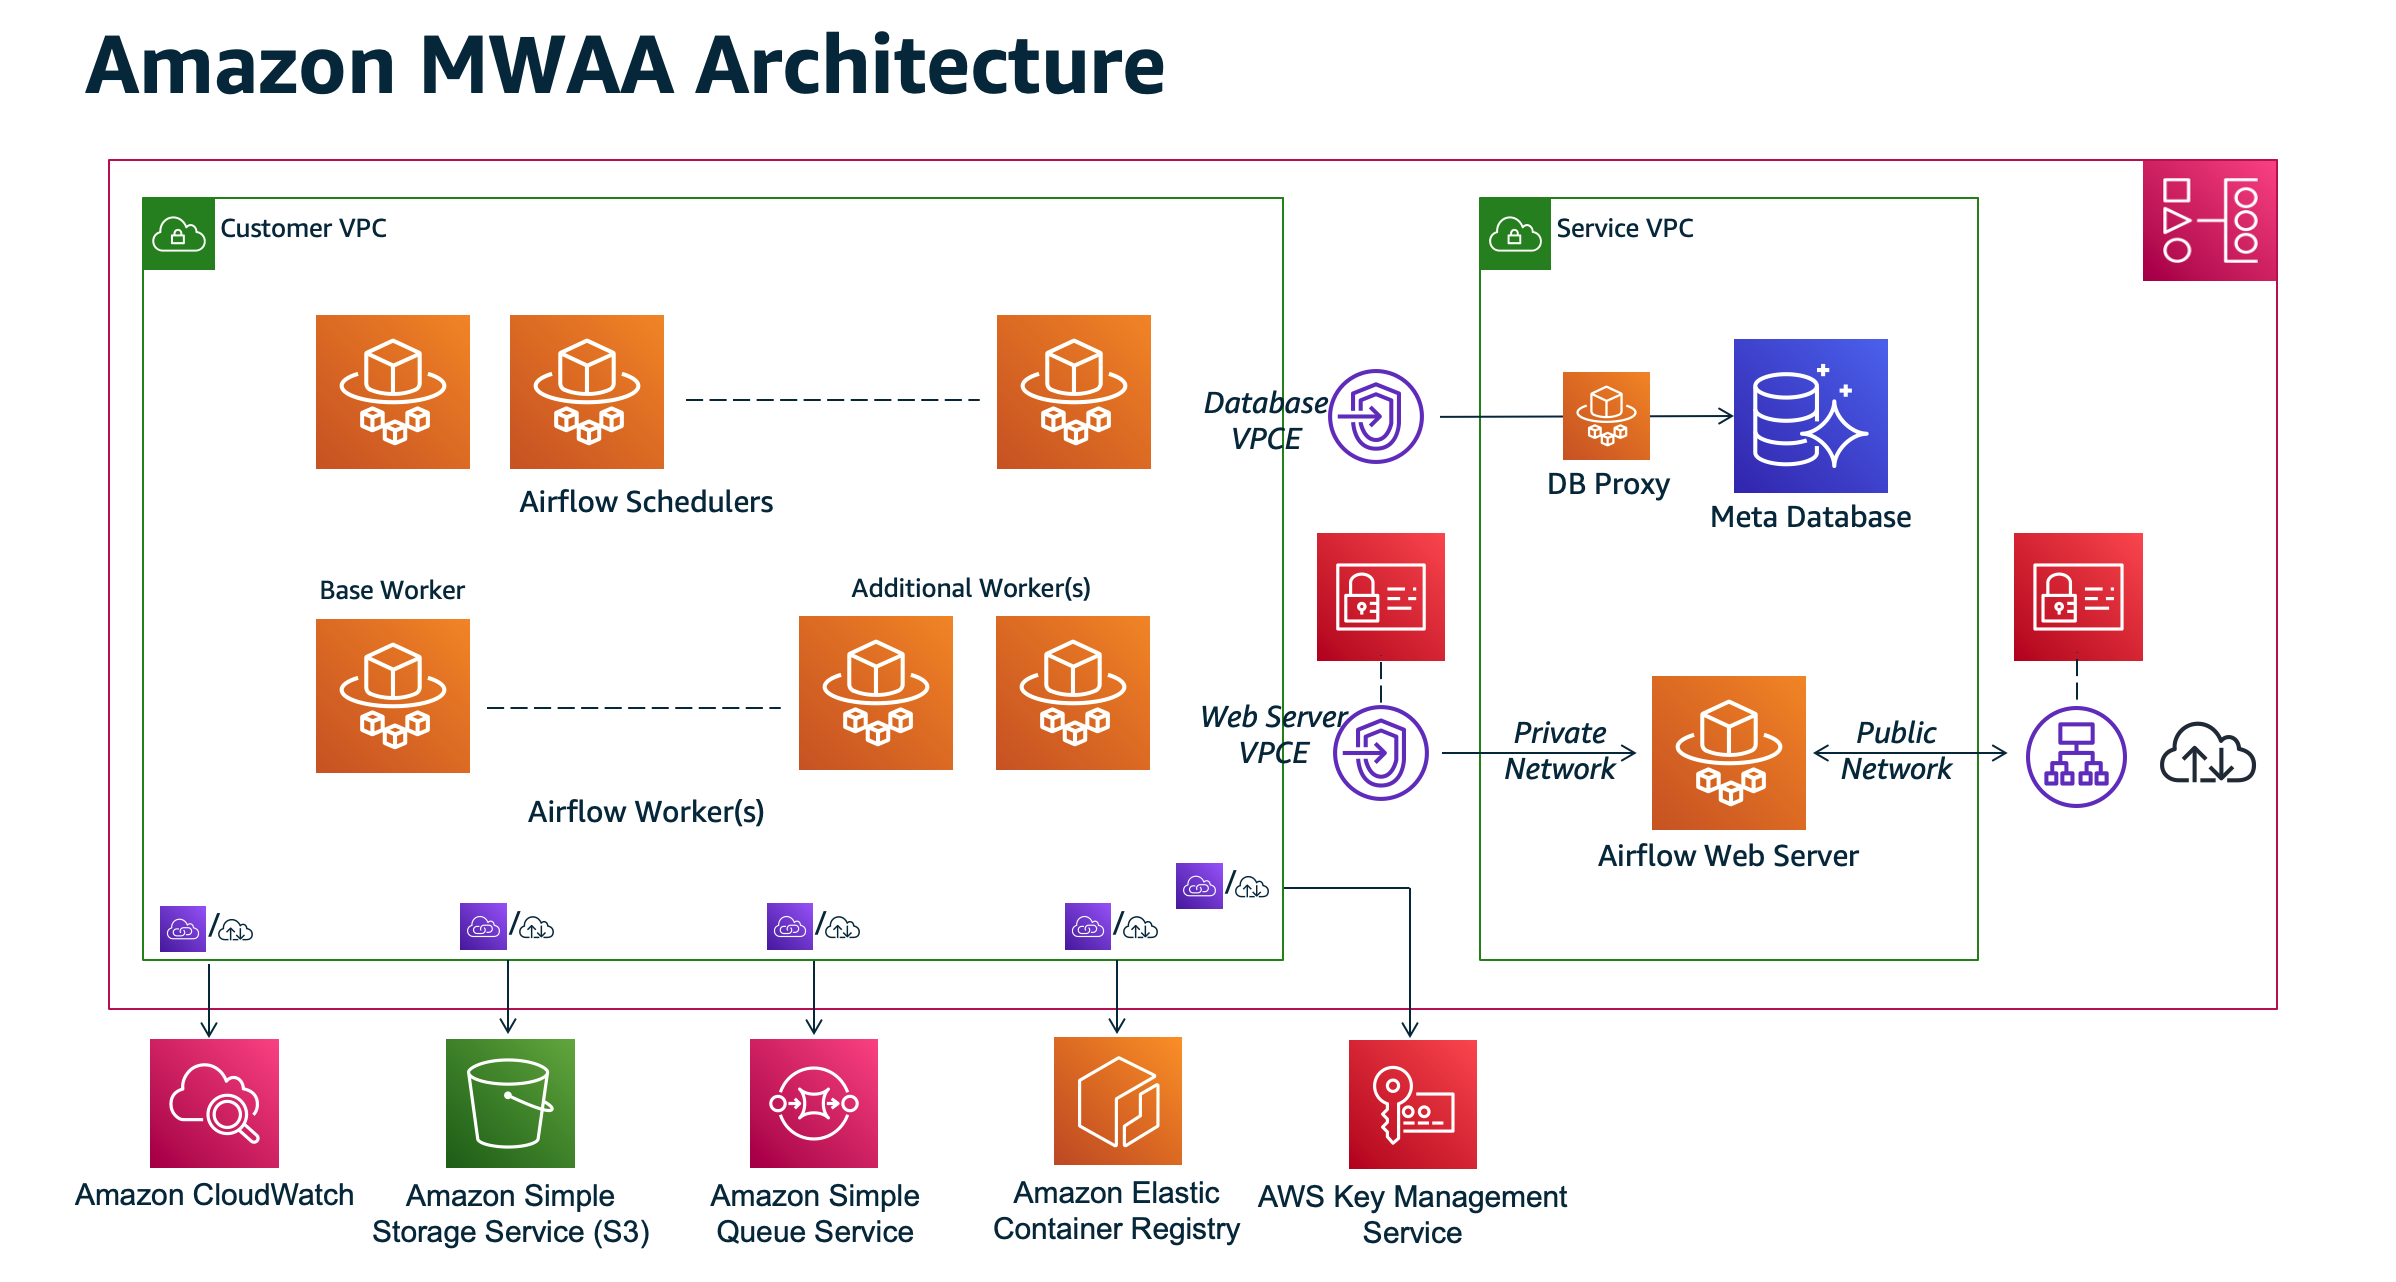 
      This image shows the architecture of an Amazon MWAA environment.
  